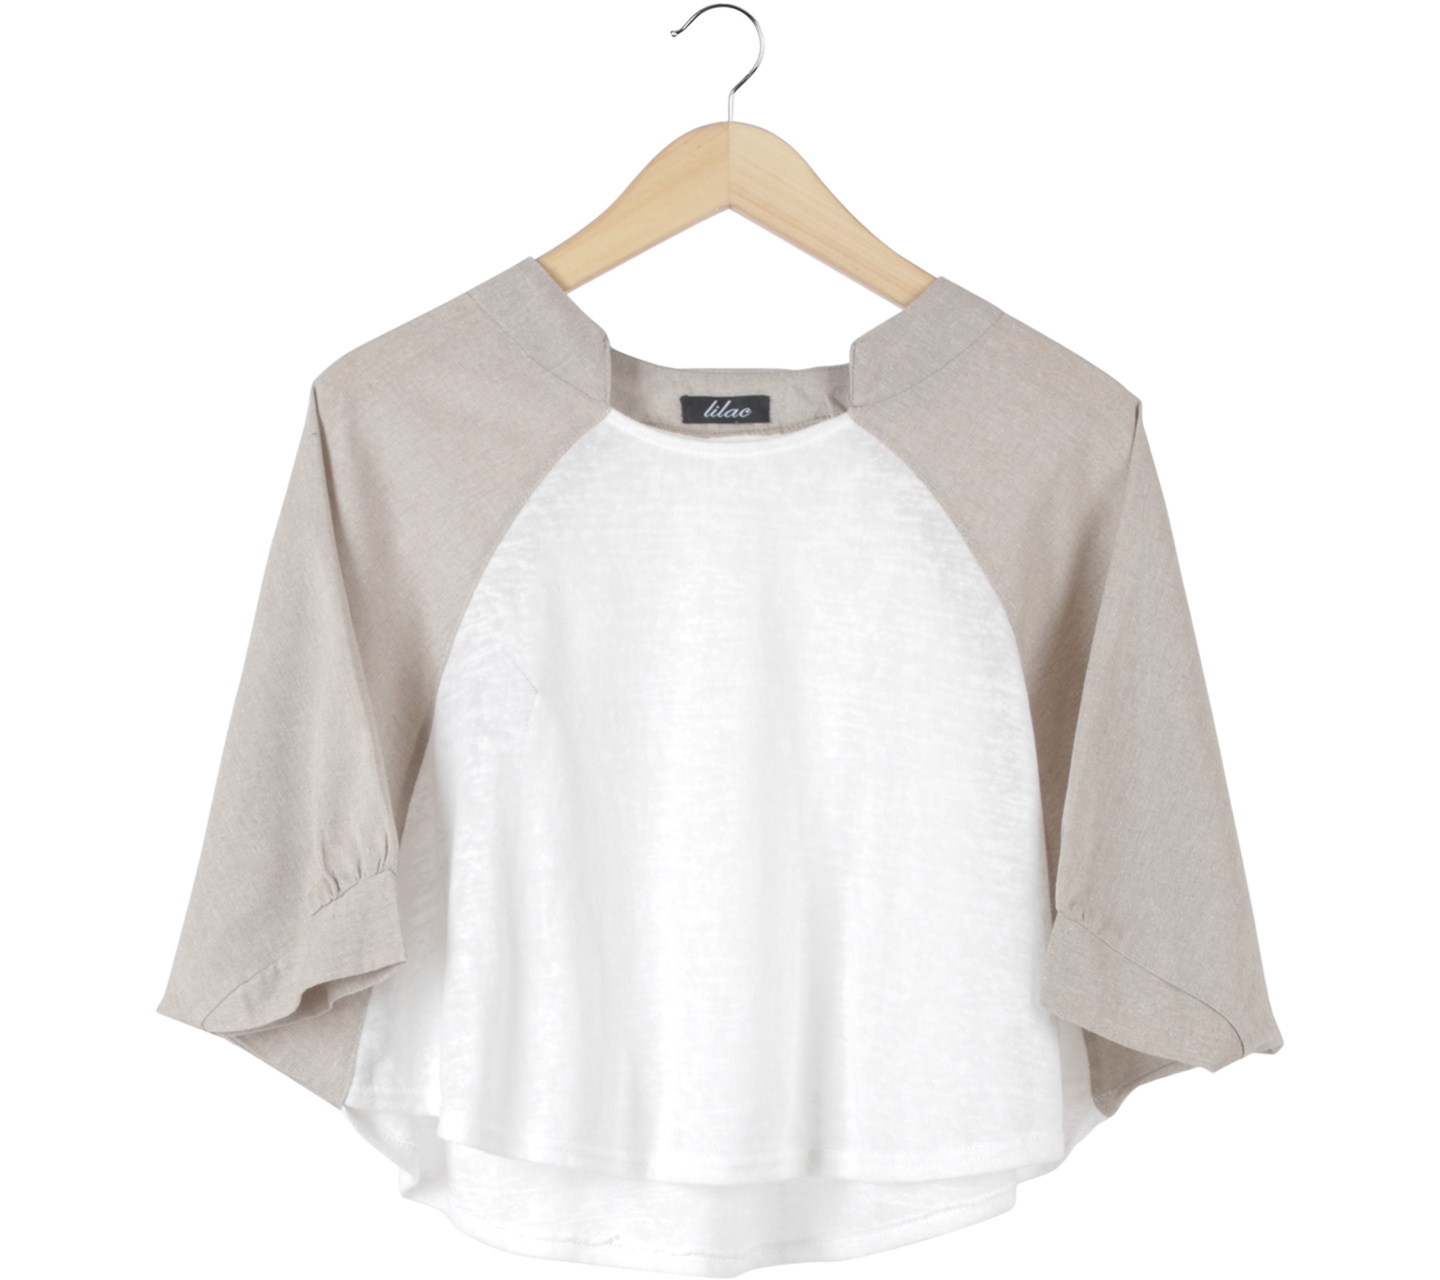 Lilac Off White And Cream Batwing Cropped Blouse